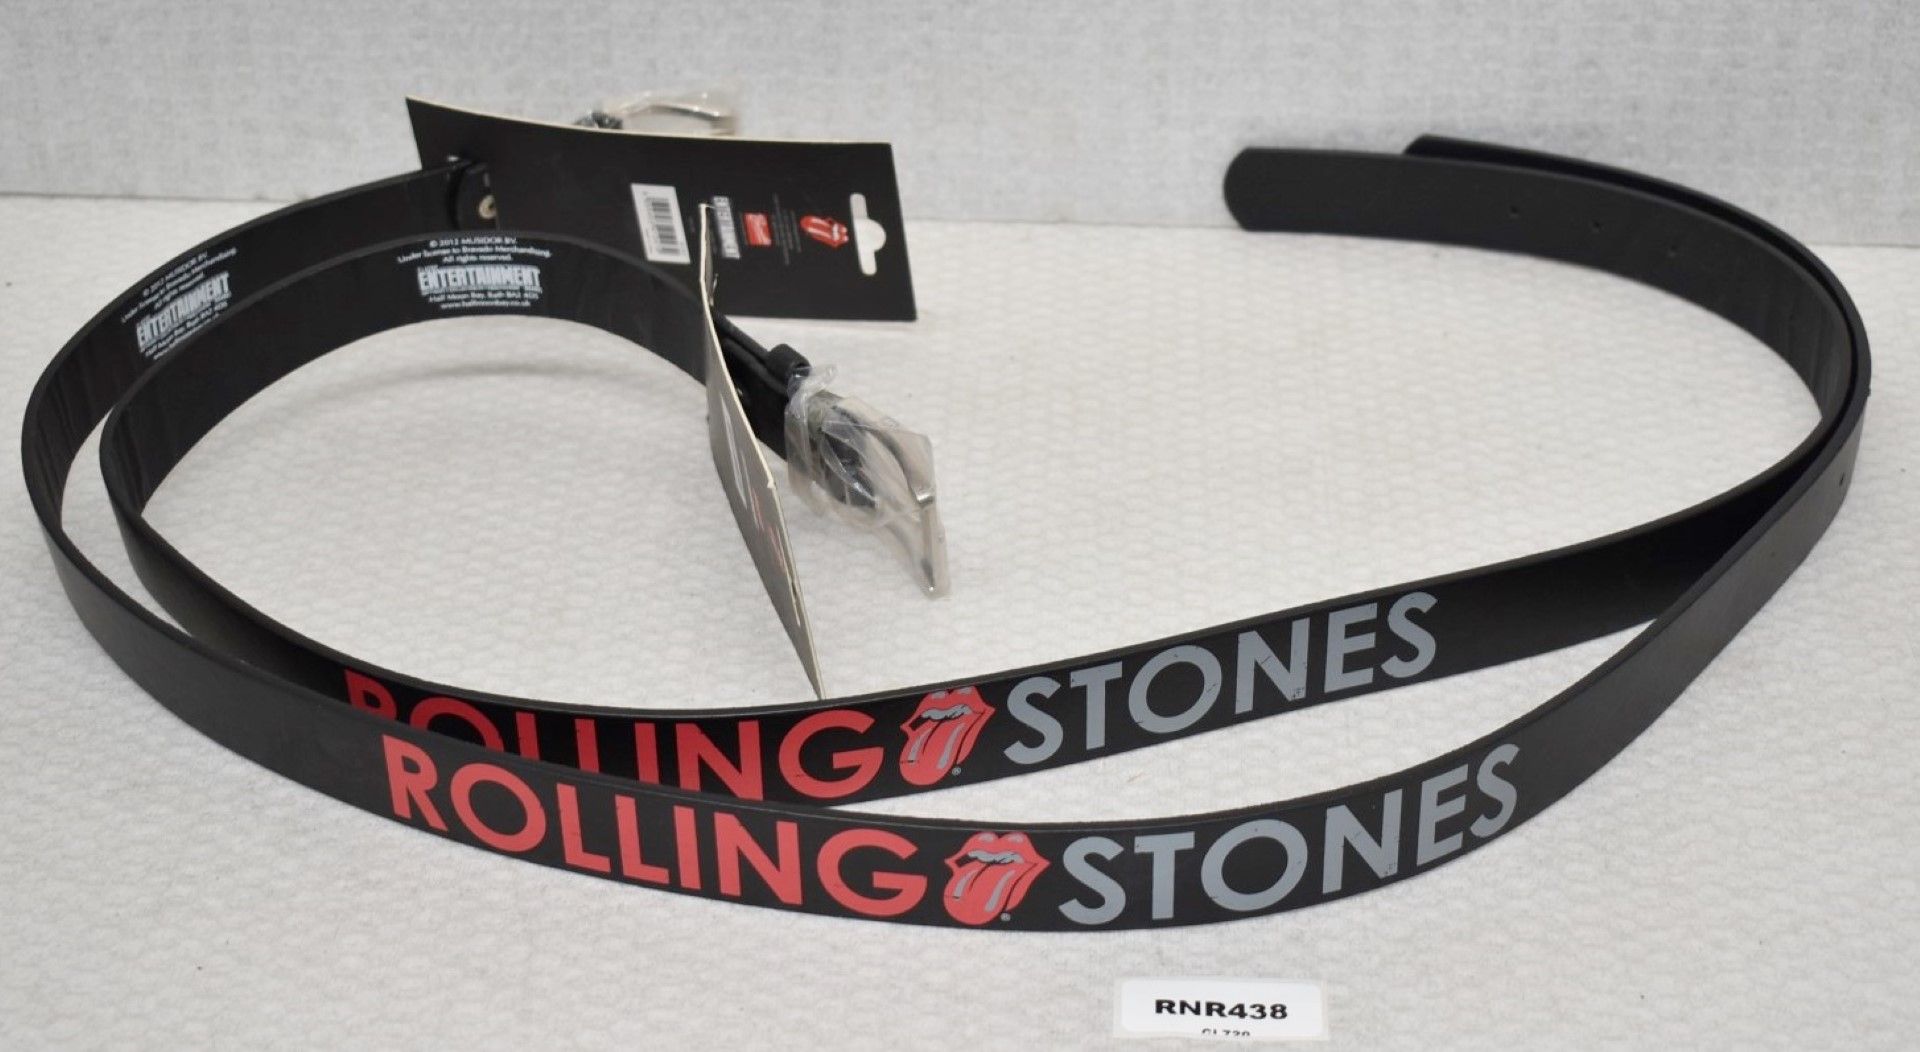 2 x Men's Rolling Stones Belts by Bravado - PU Leather - Iconic Tongue Logo - RRP £40 - Image 2 of 6